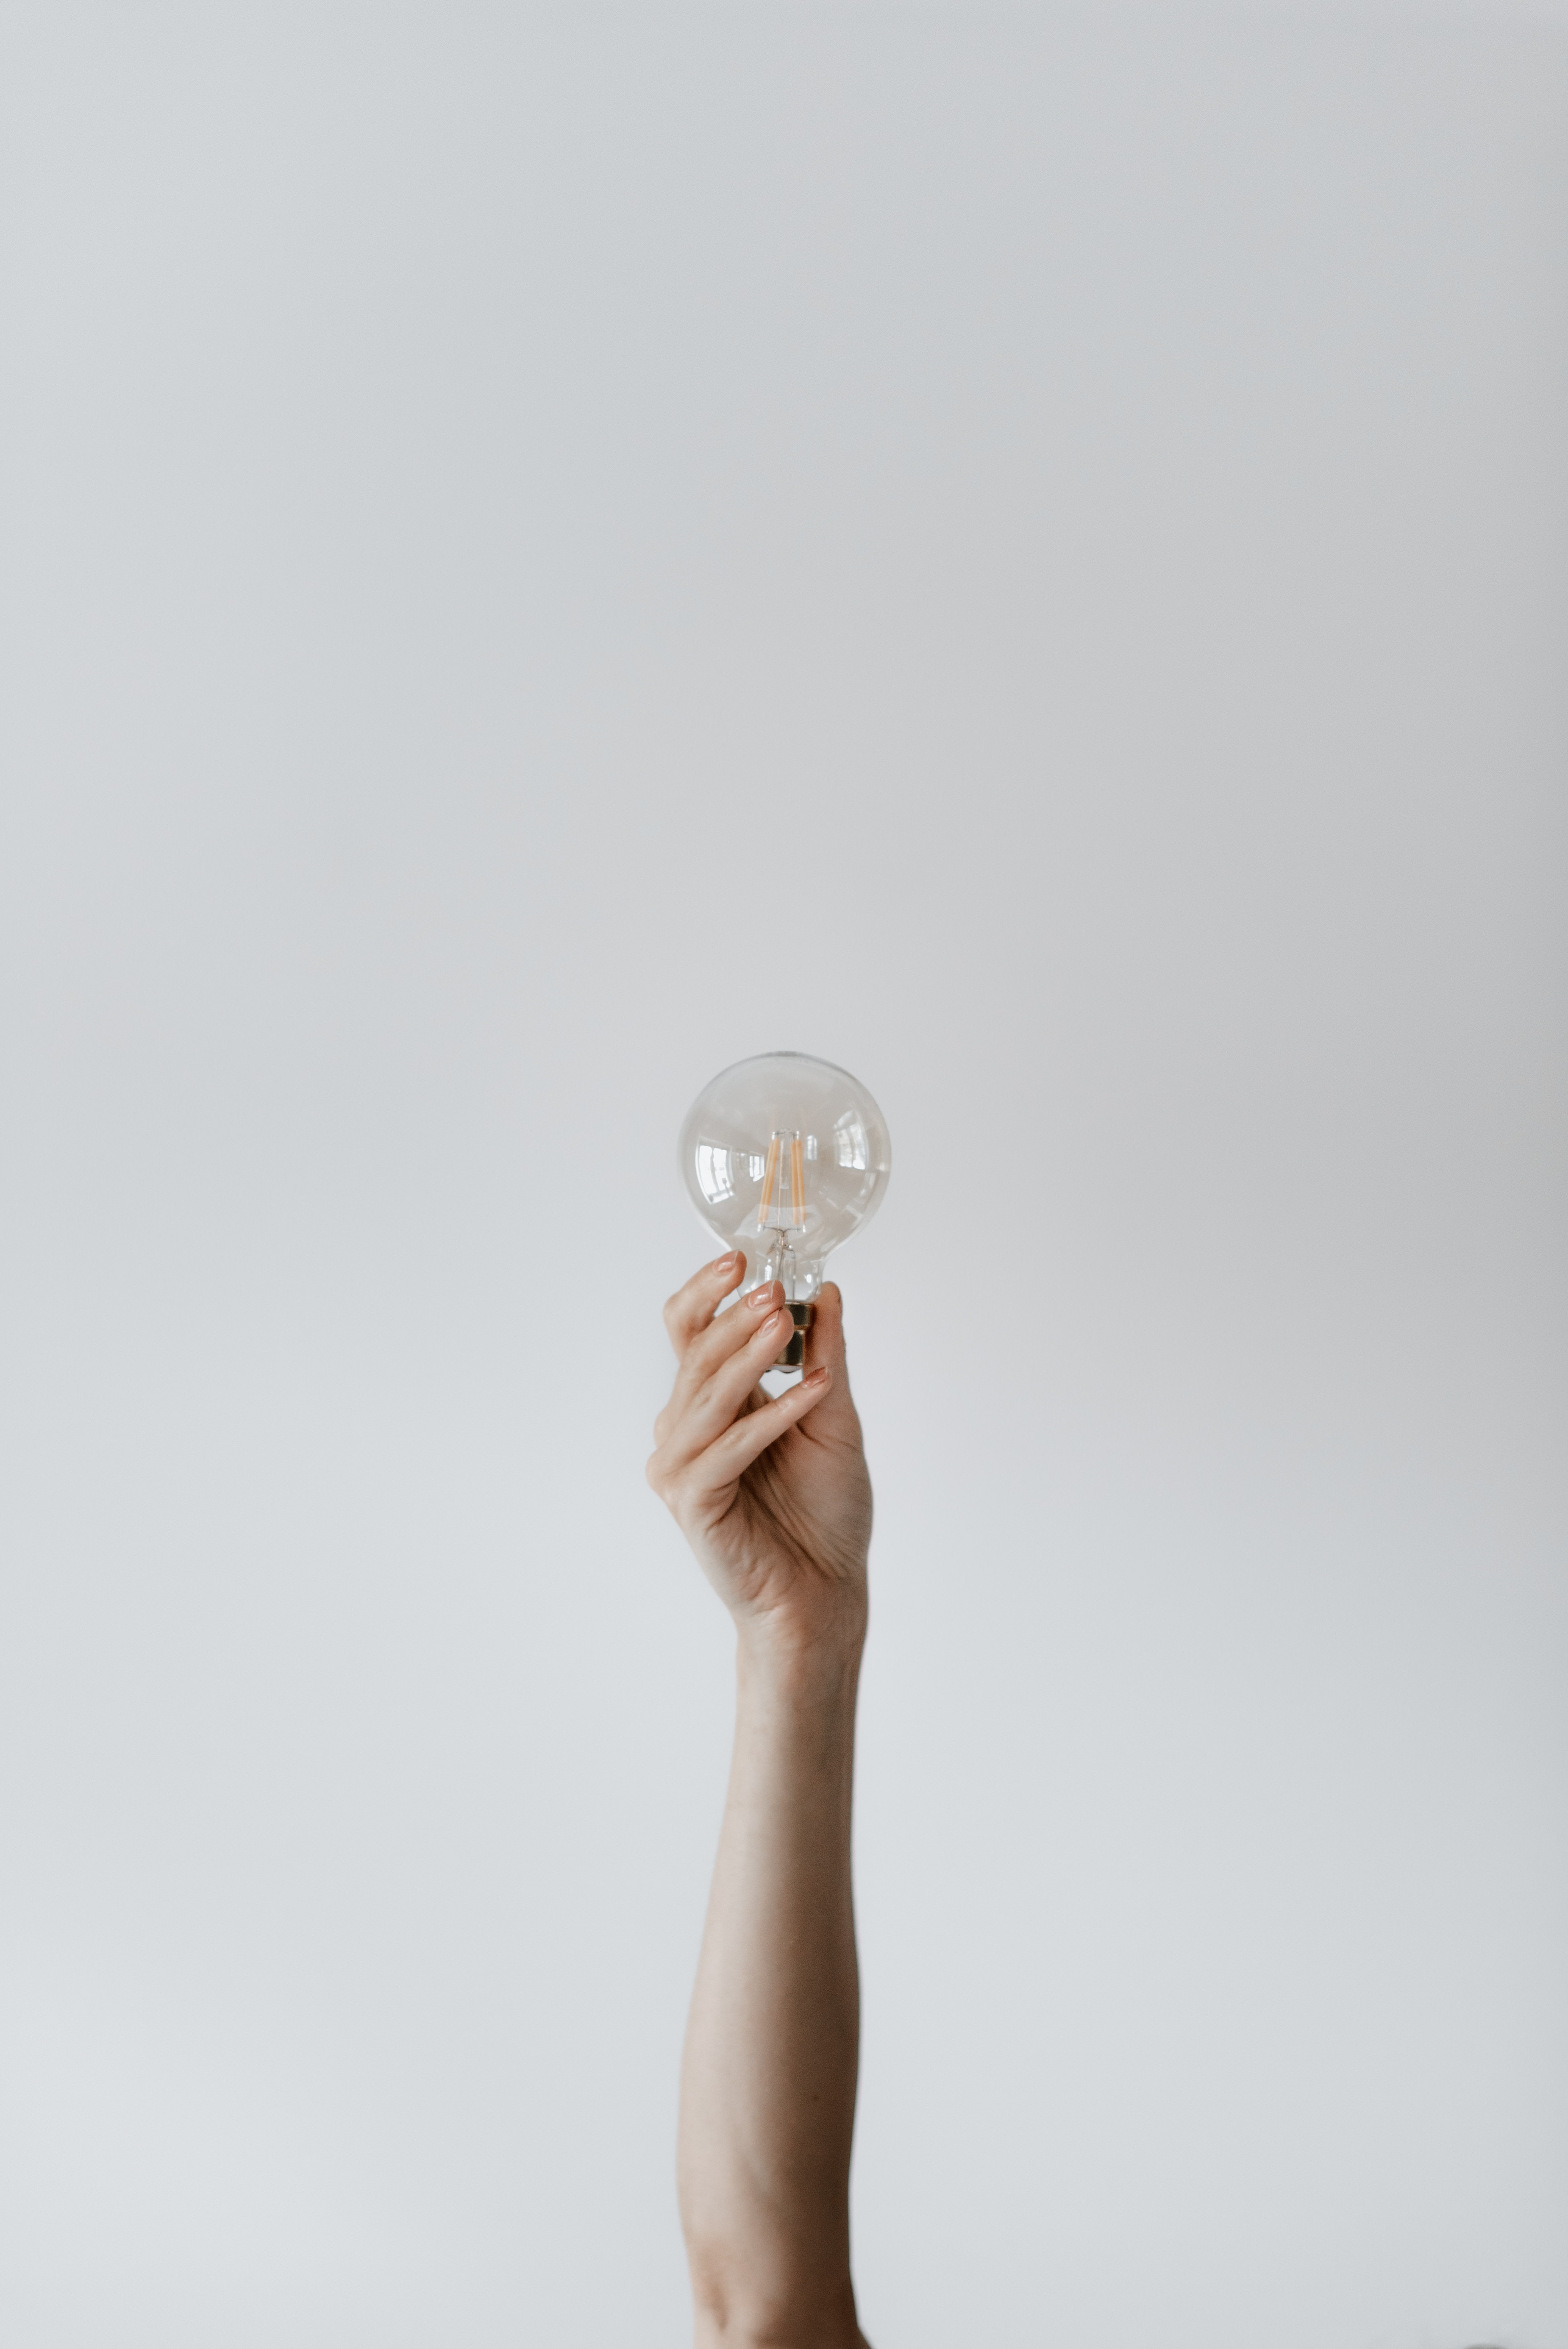 Person holding a lightbulb